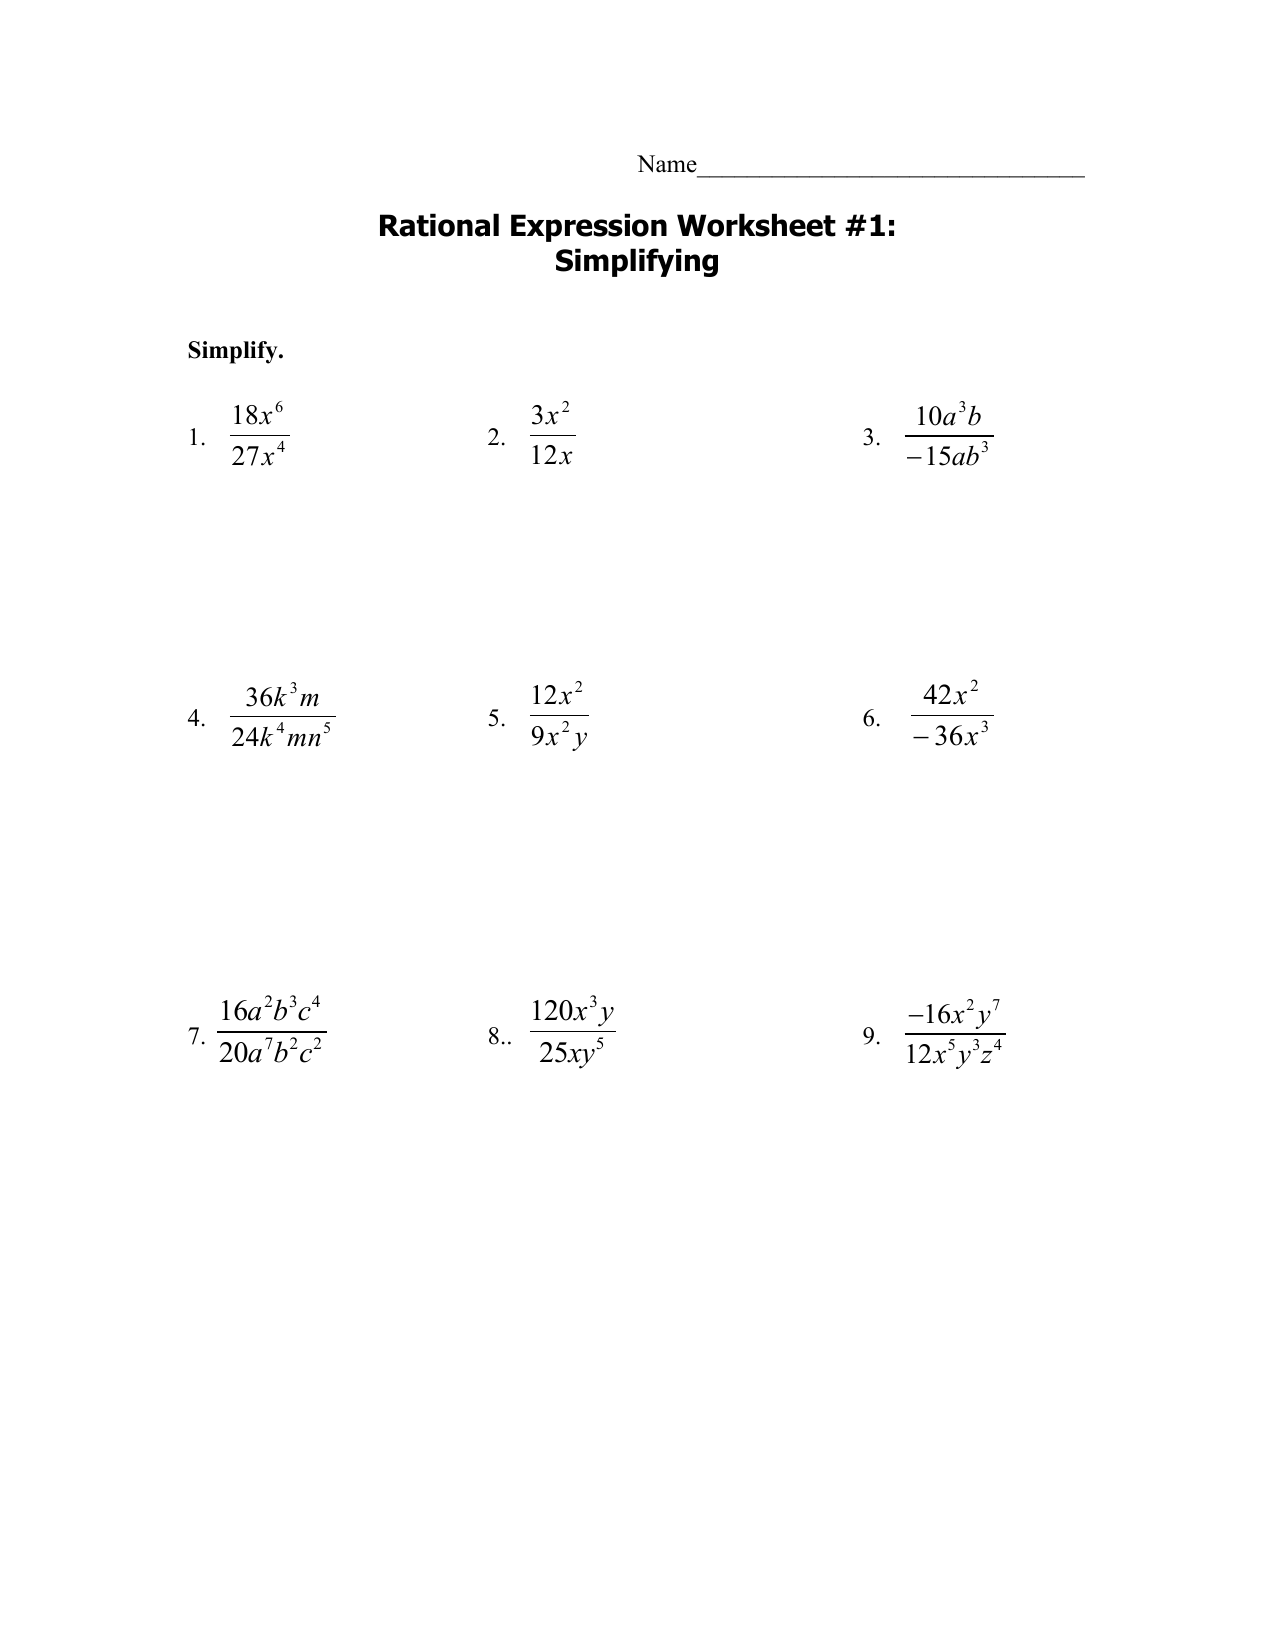 M11111111 rationalworksheets1111-111111 1111 For Rational Expressions Worksheet Answers